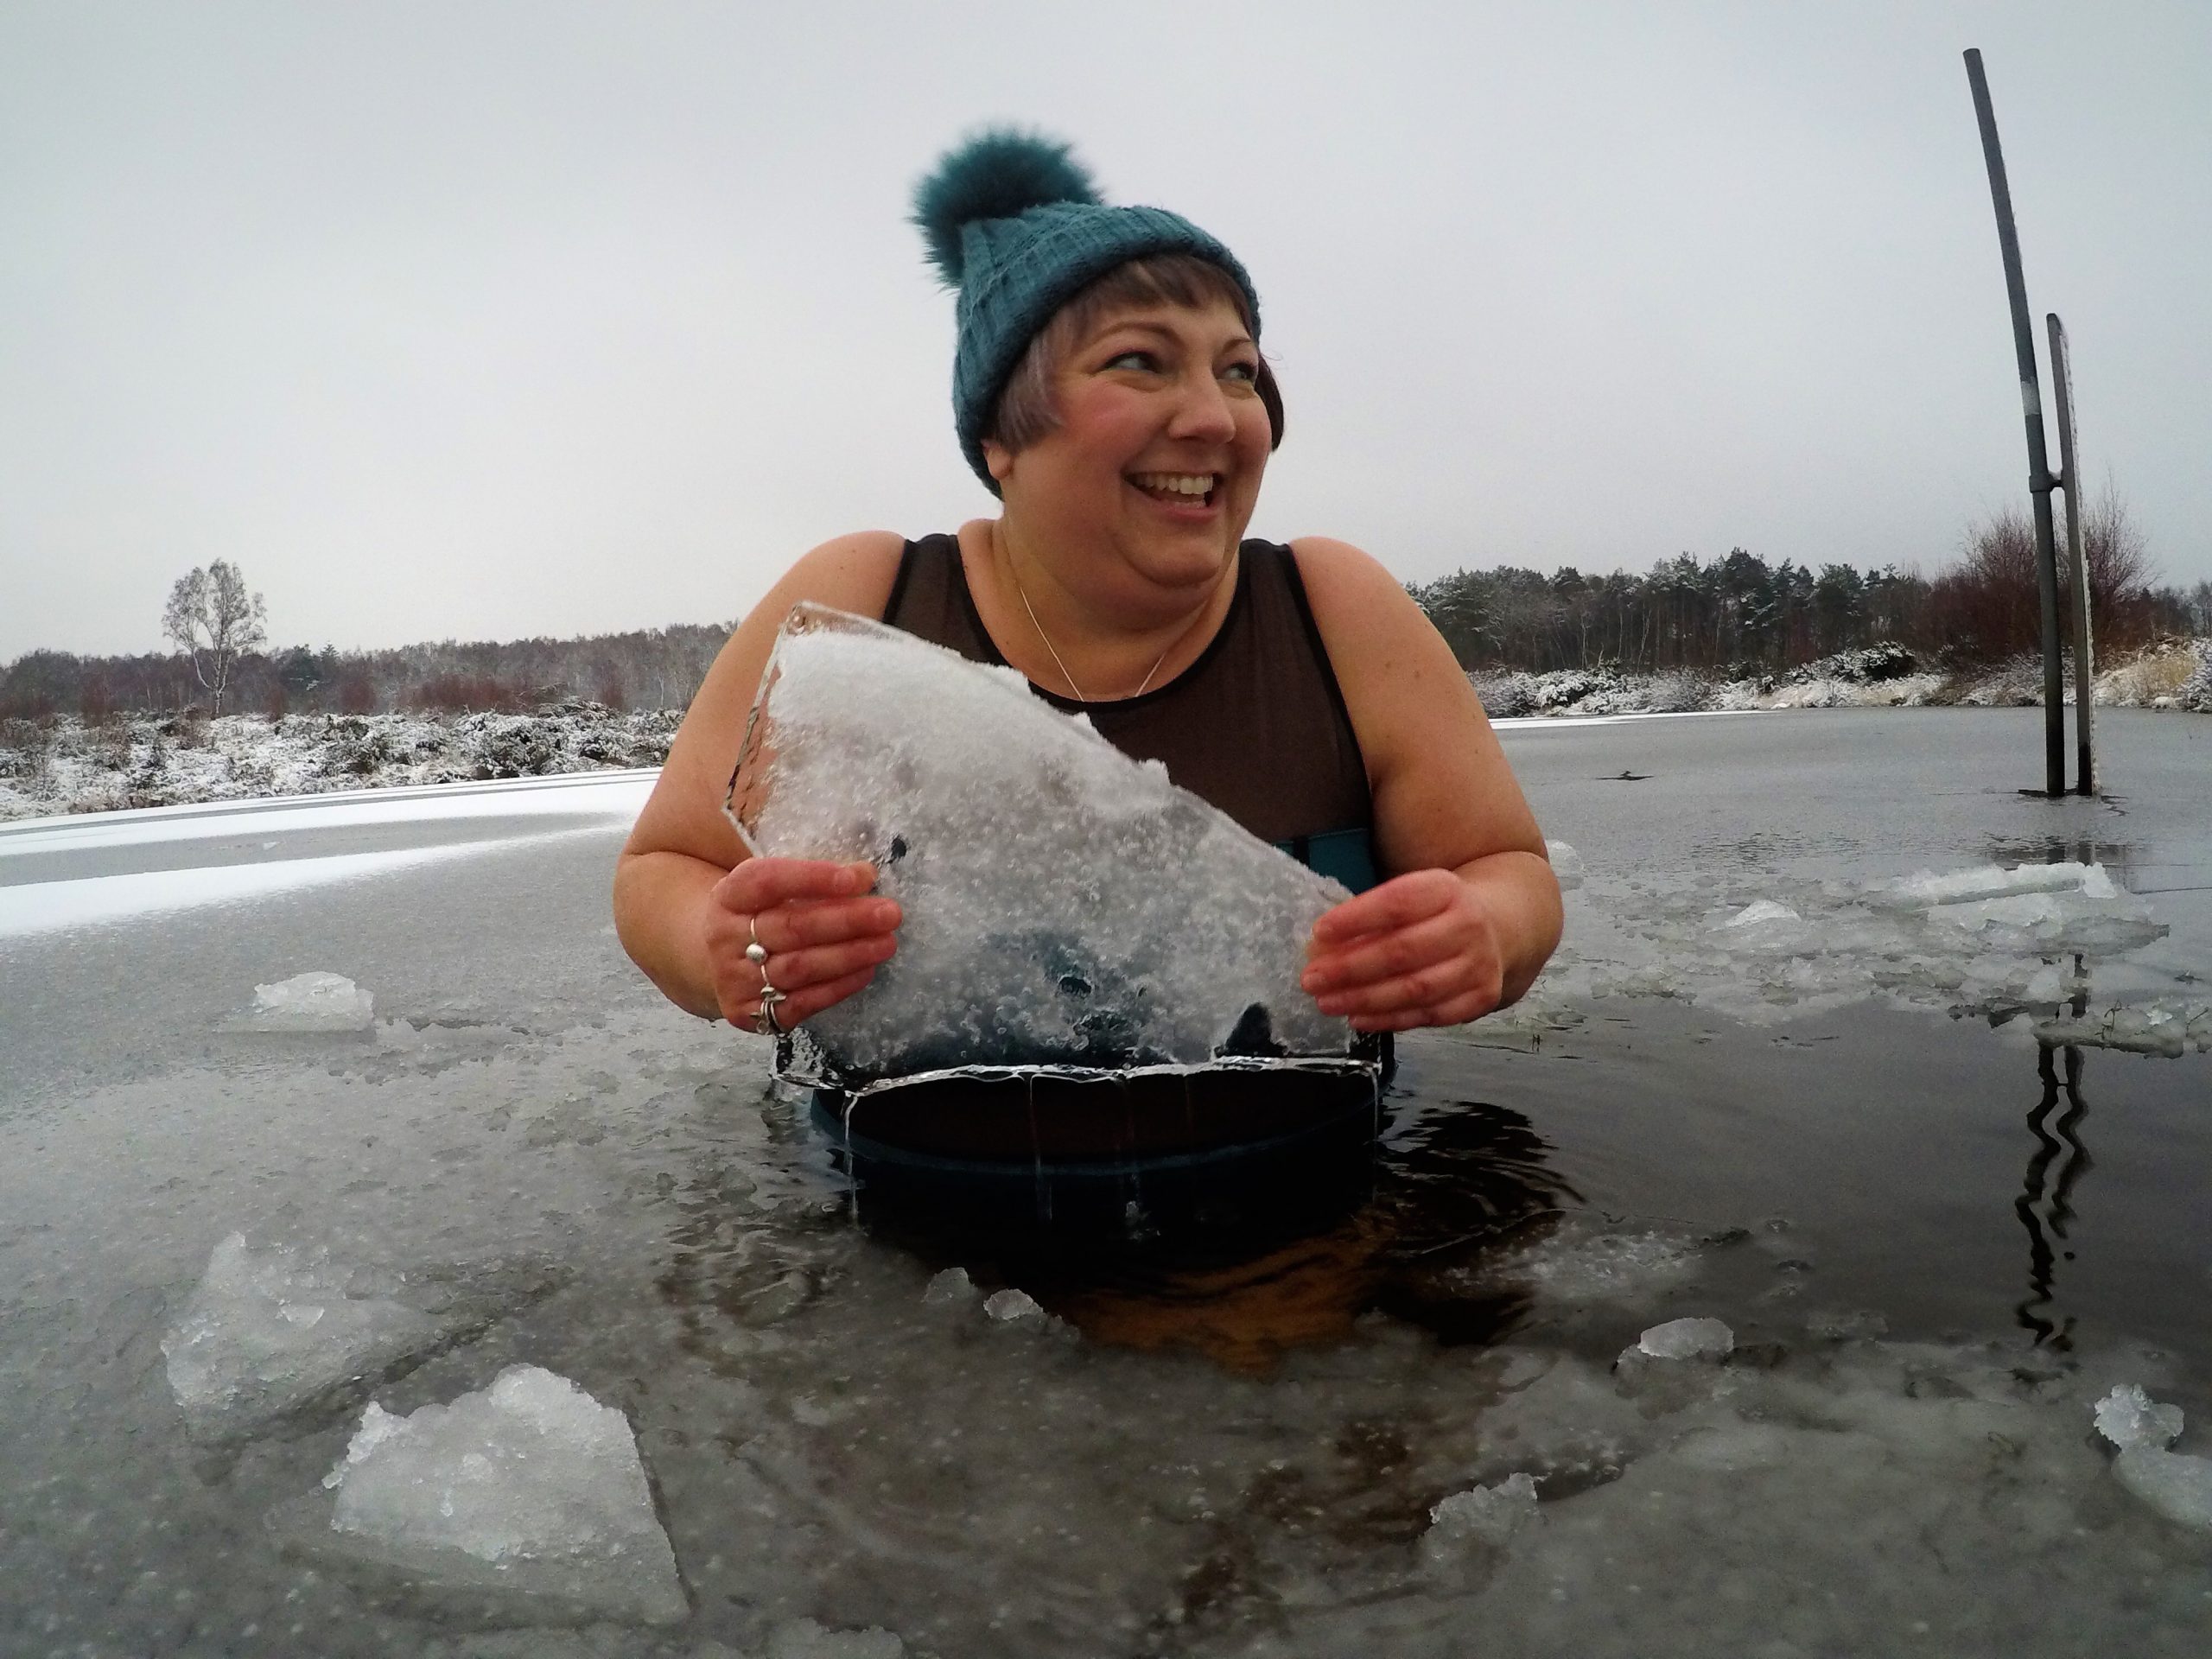 Female standing in cold water holding block of ice. wearing a swimming costume and wooly hat.